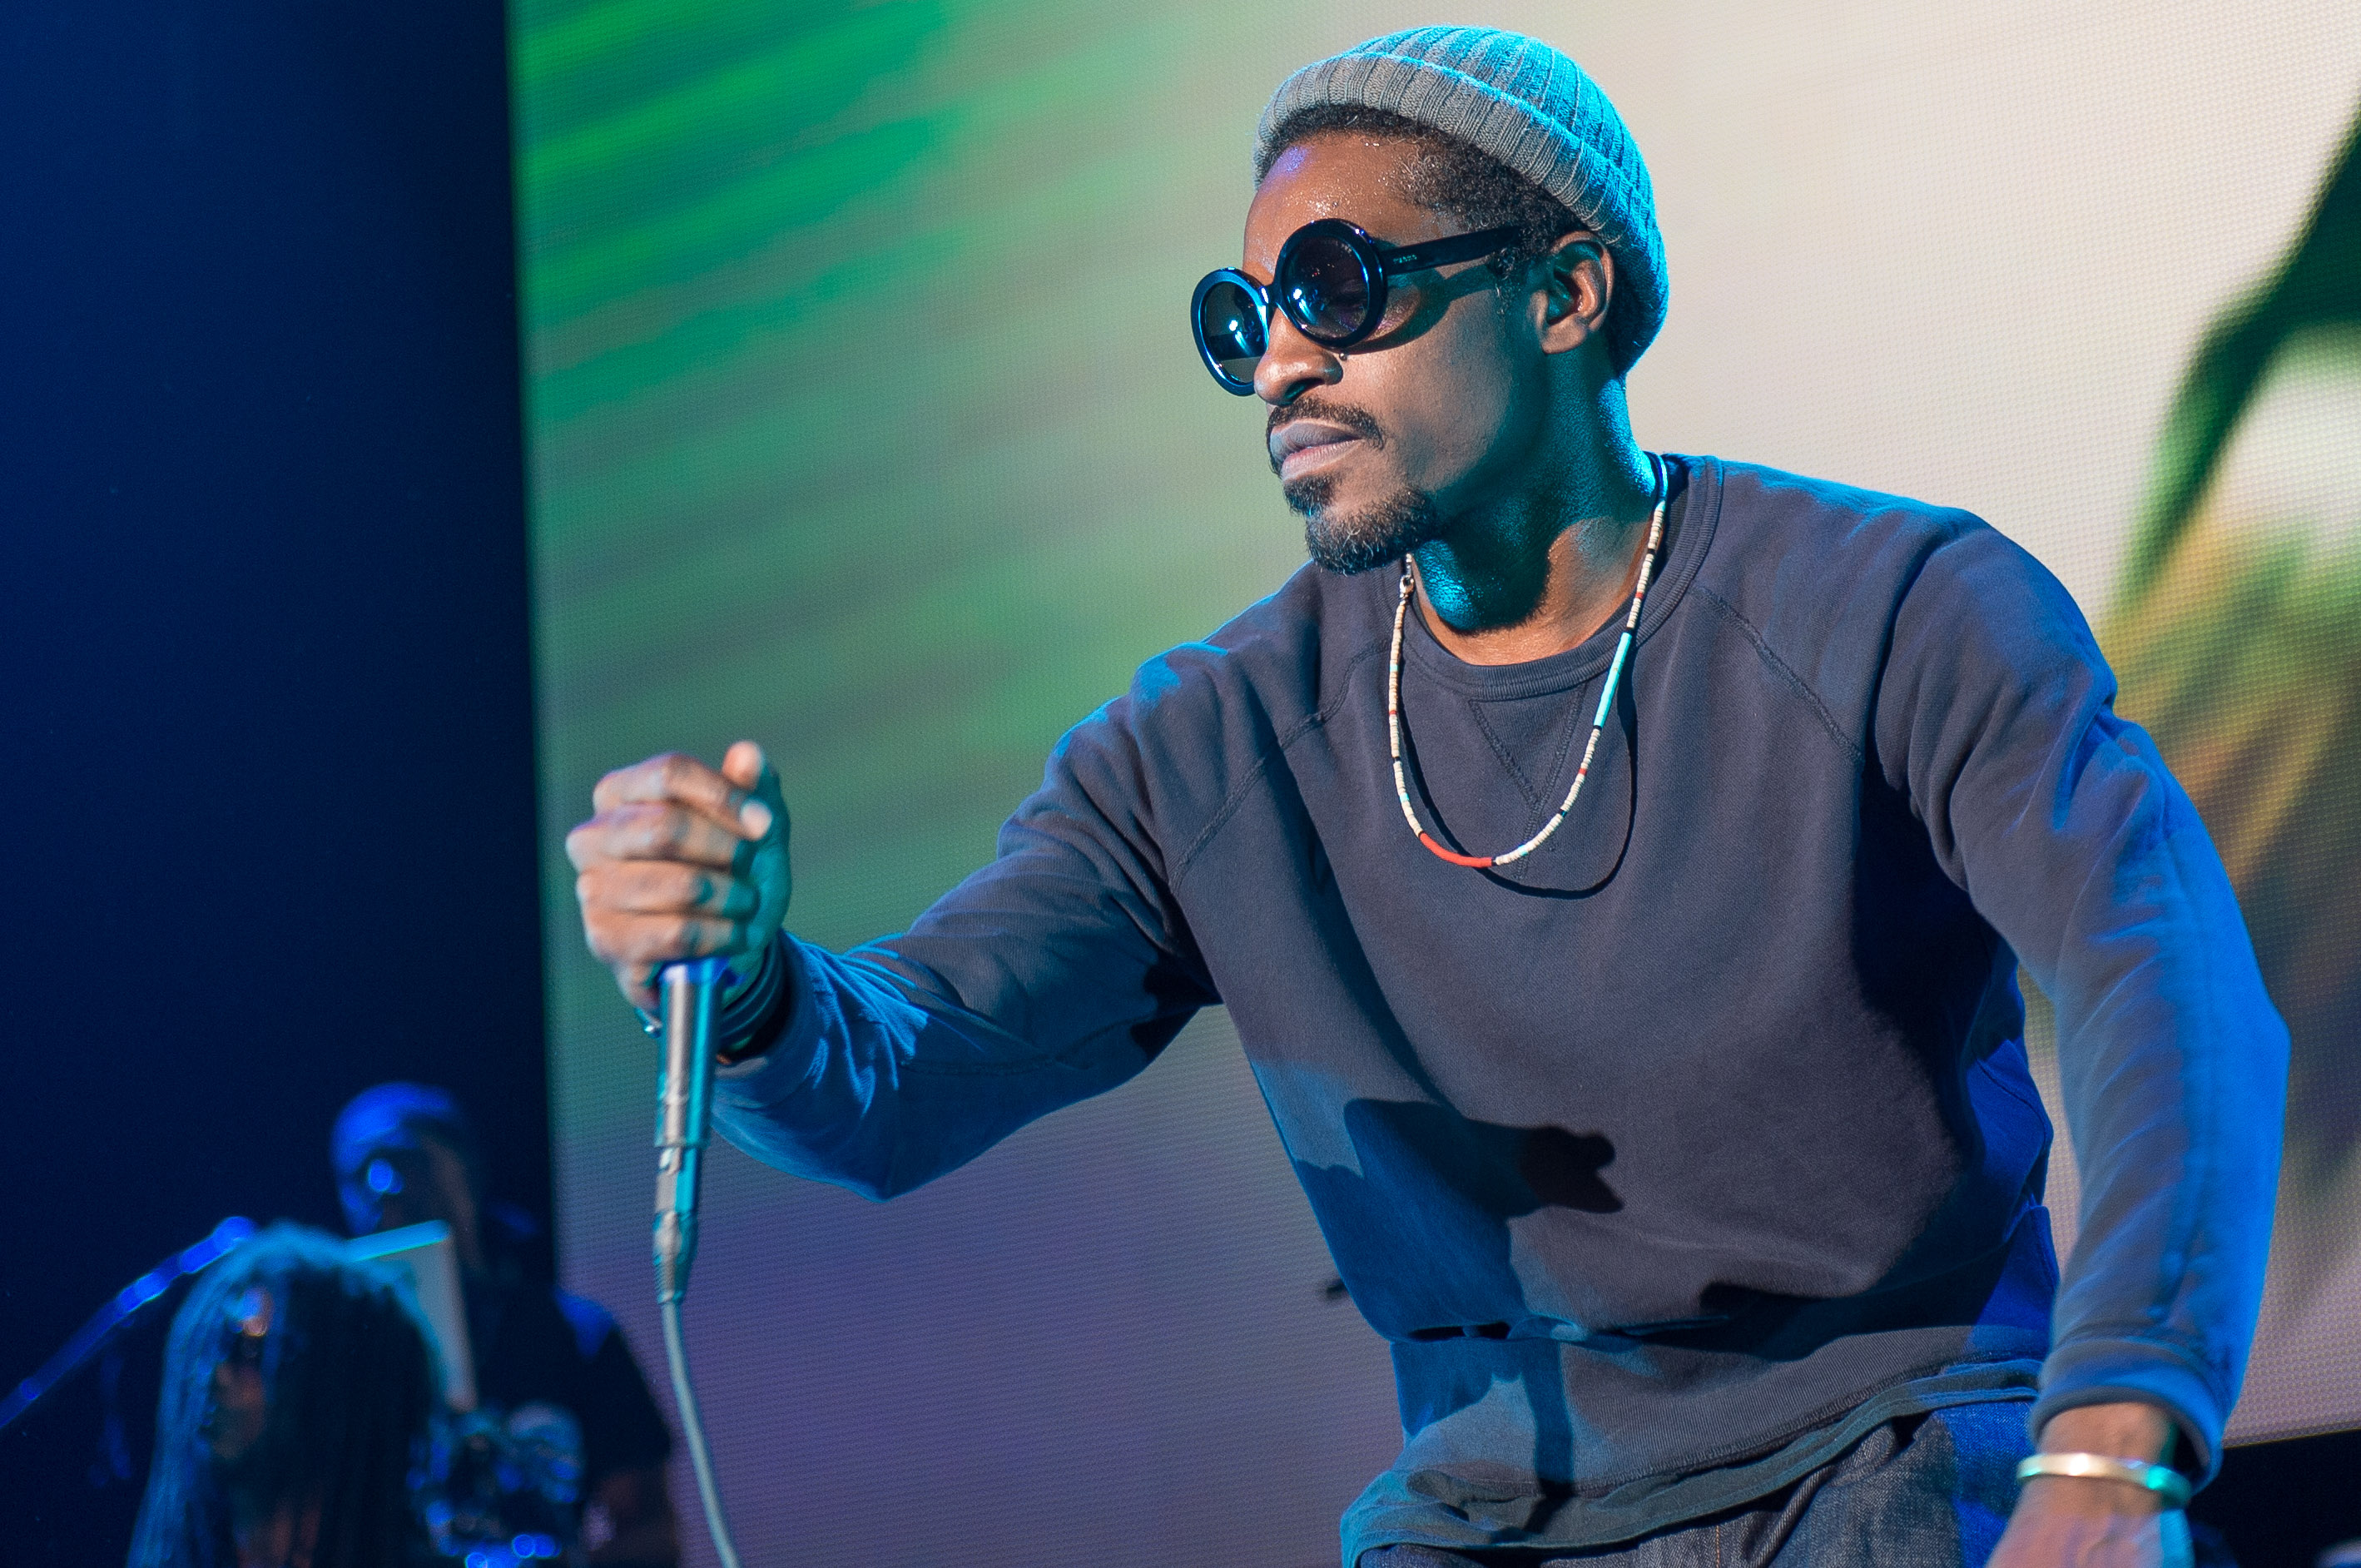 Andre 3000 performs on stage during the 2016 ONE Musicfest